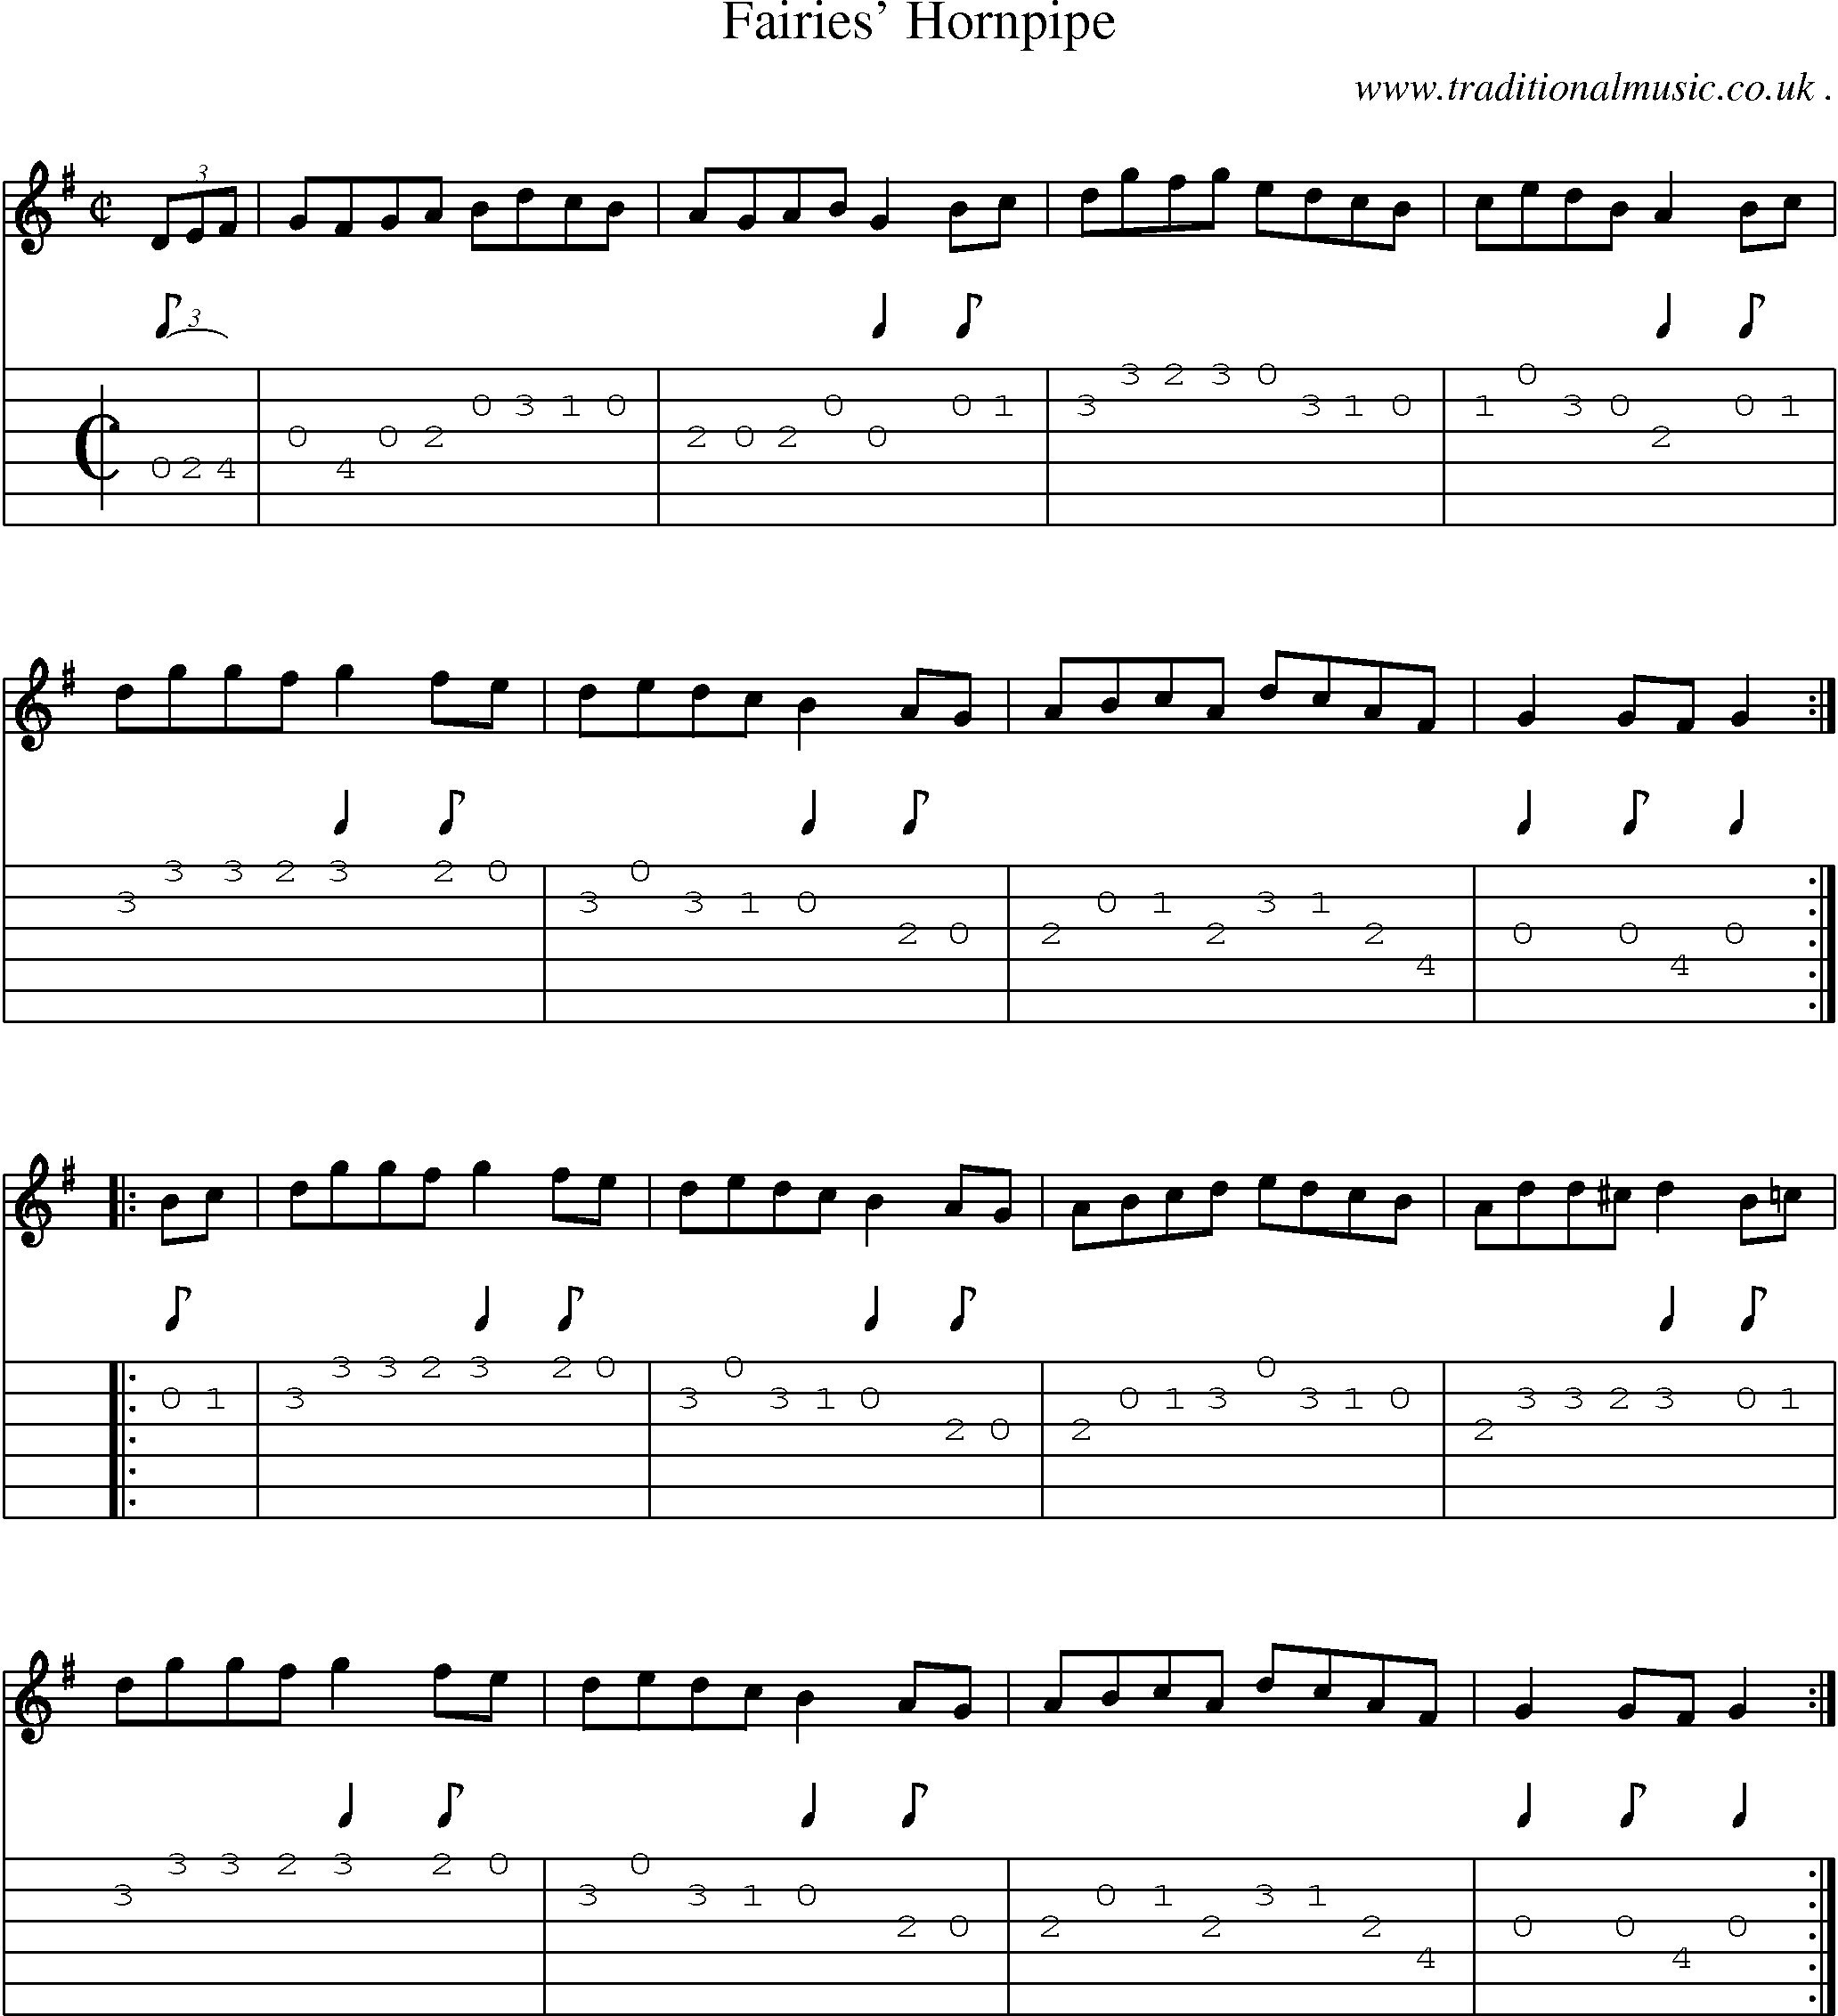 Sheet-Music and Guitar Tabs for Fairies Hornpipe